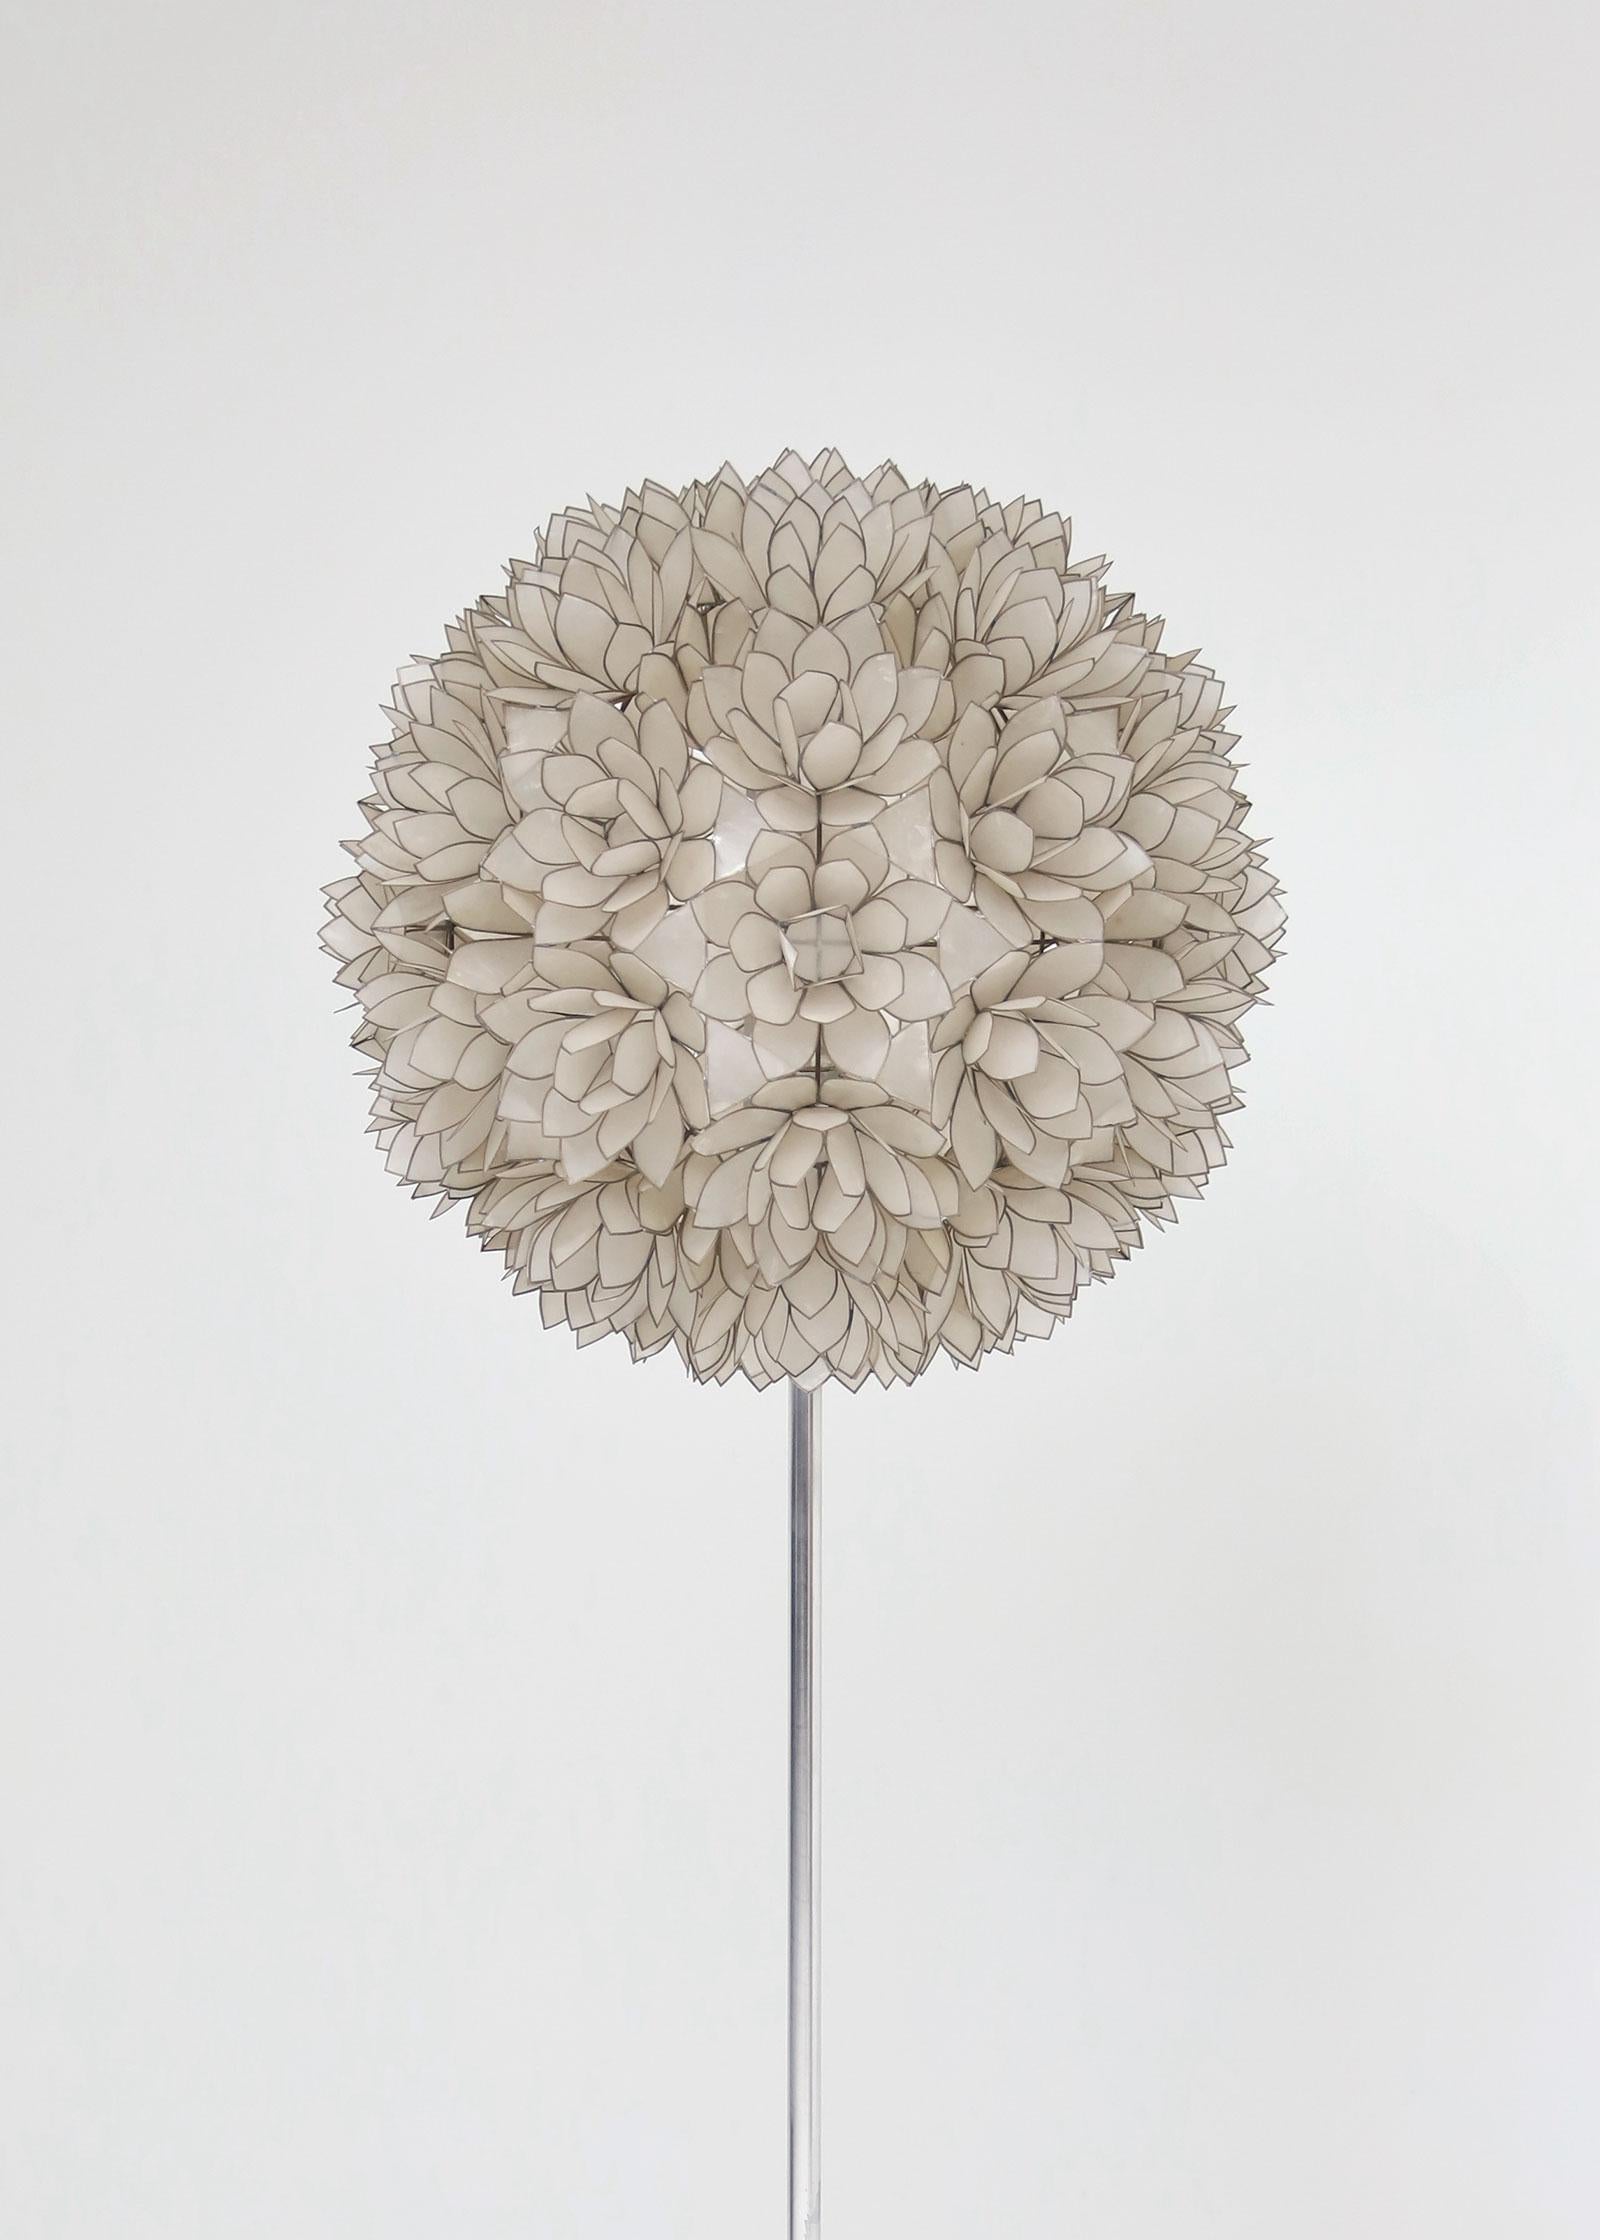 Beautiful Lotus flower floor lamp in spherical shape consisting of Lotus Capiz shaped flowers. Manufacturer is Rausch Beleuchtung, Made in Germany who produced these during the late 70s. Very high quality and precious made craftsmanship. The black